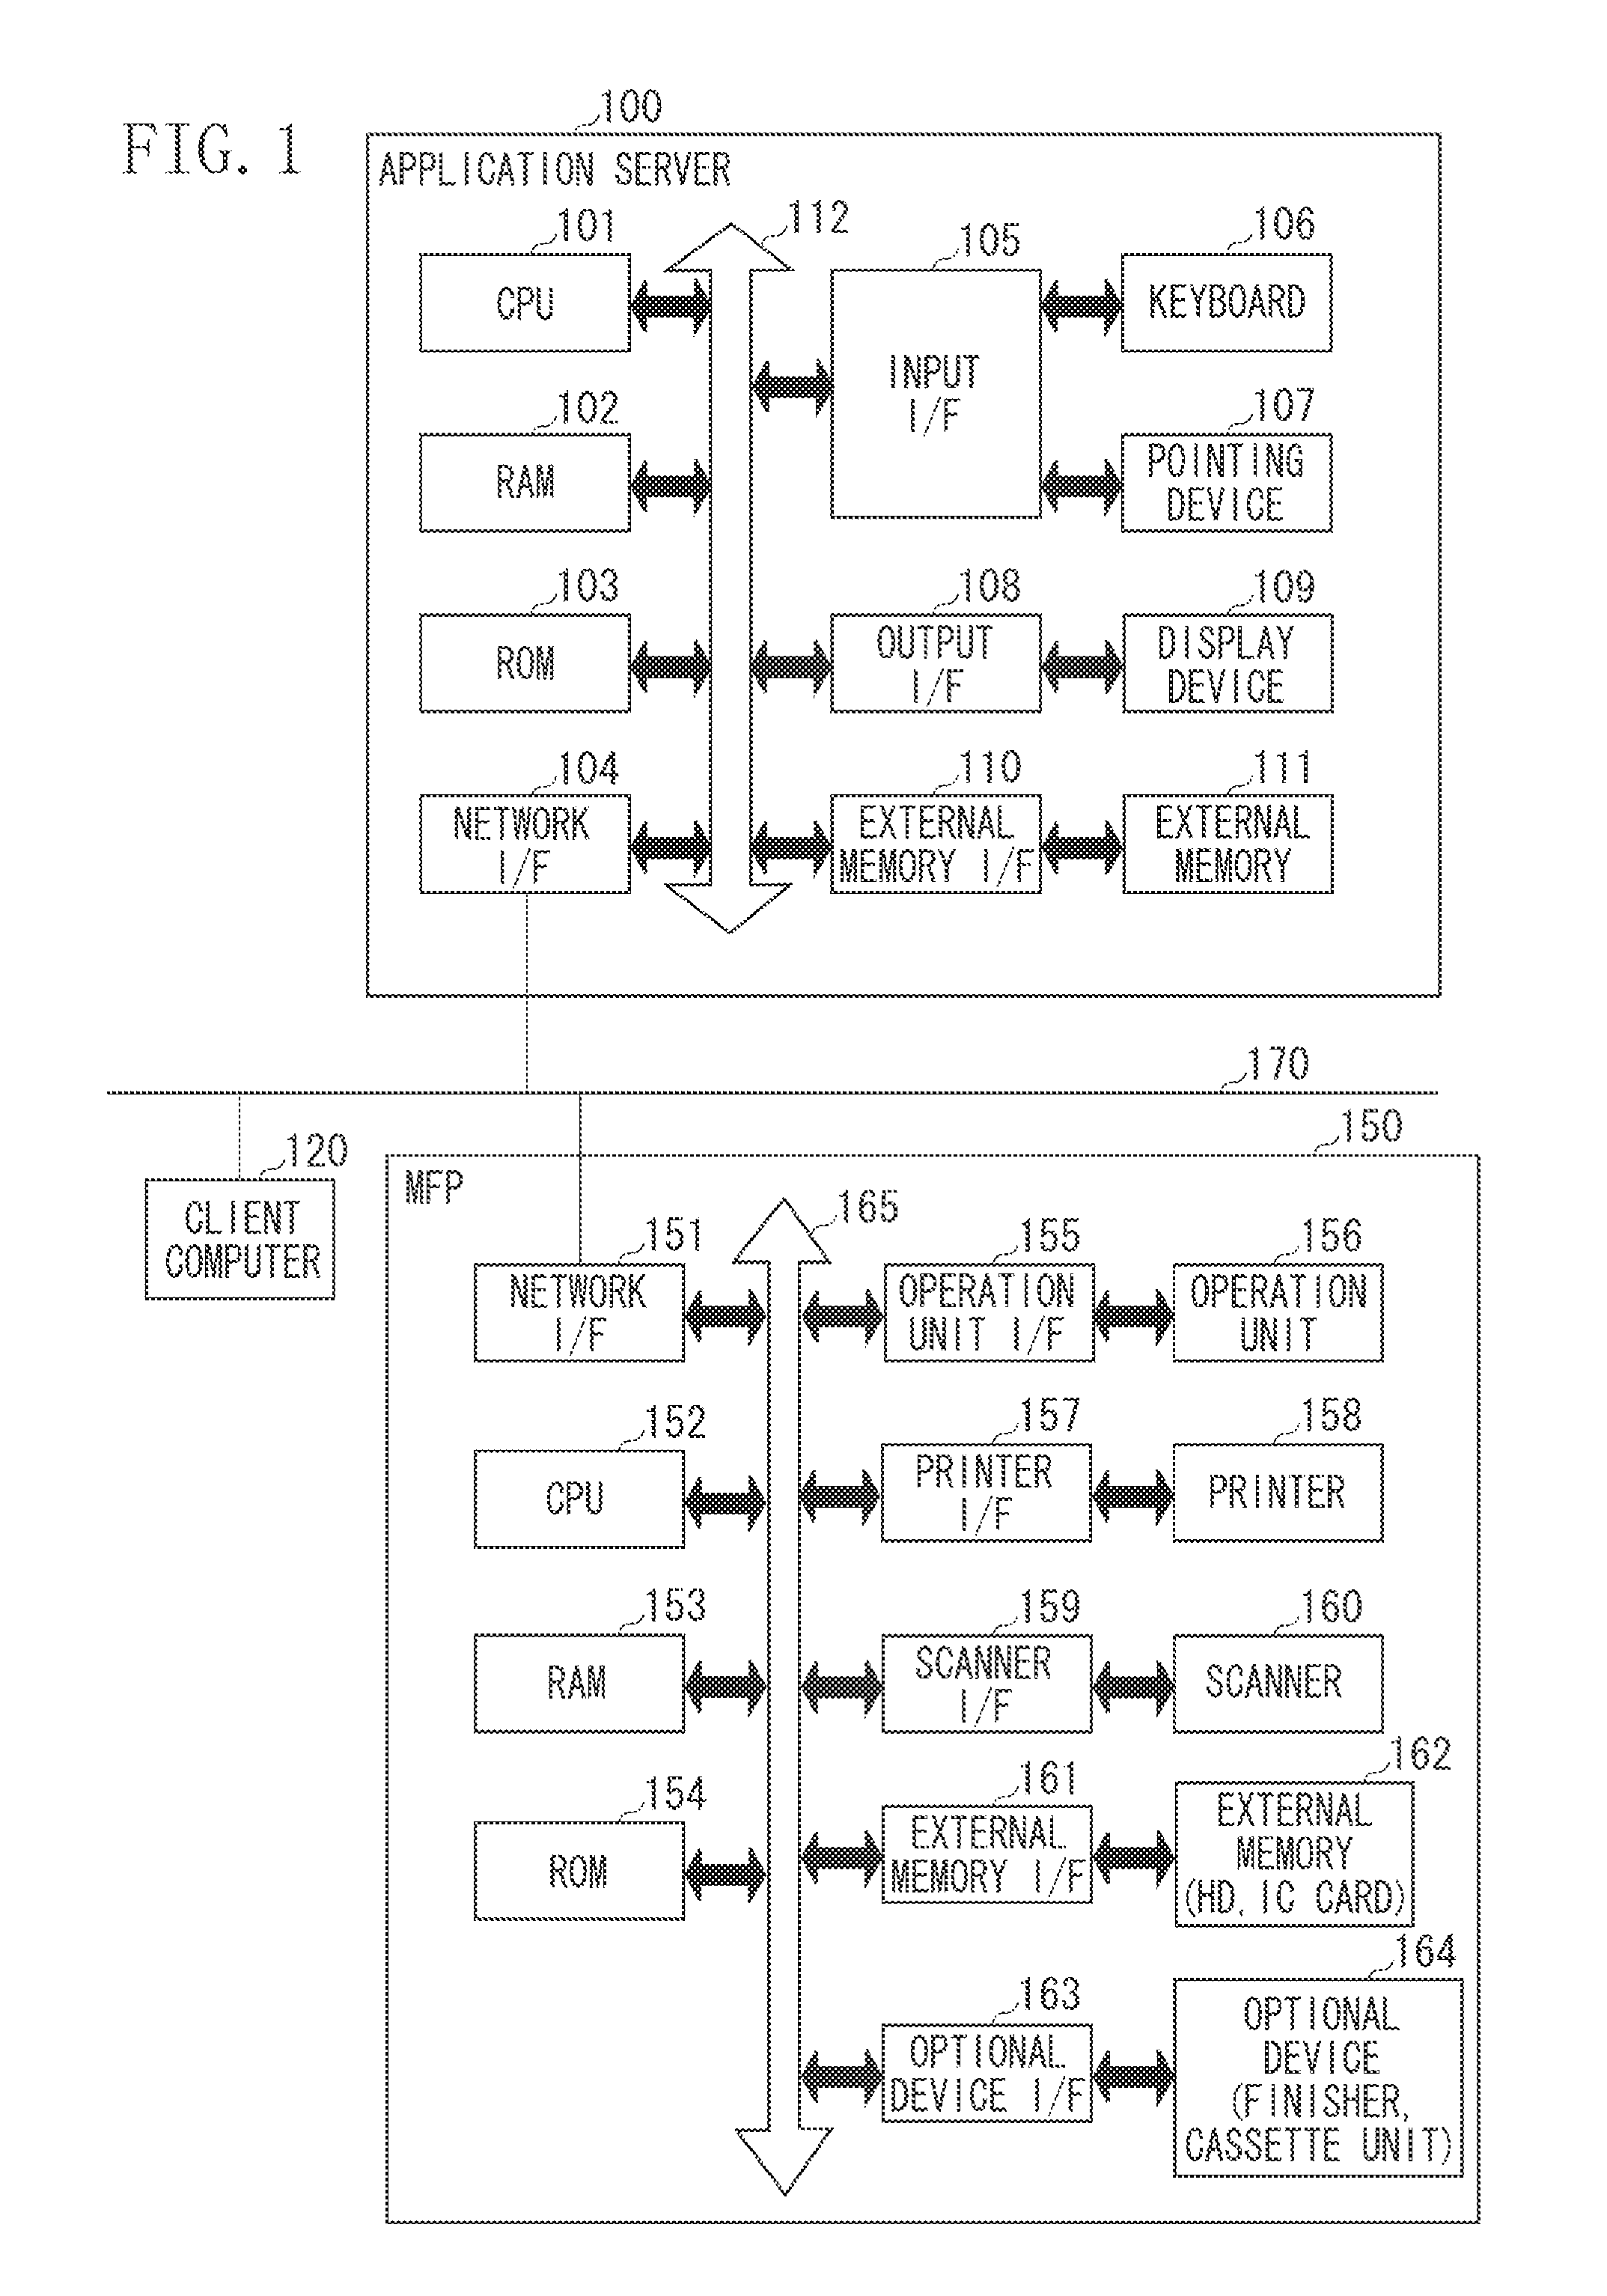 Management apparatus for managing network device and method for controlling the same